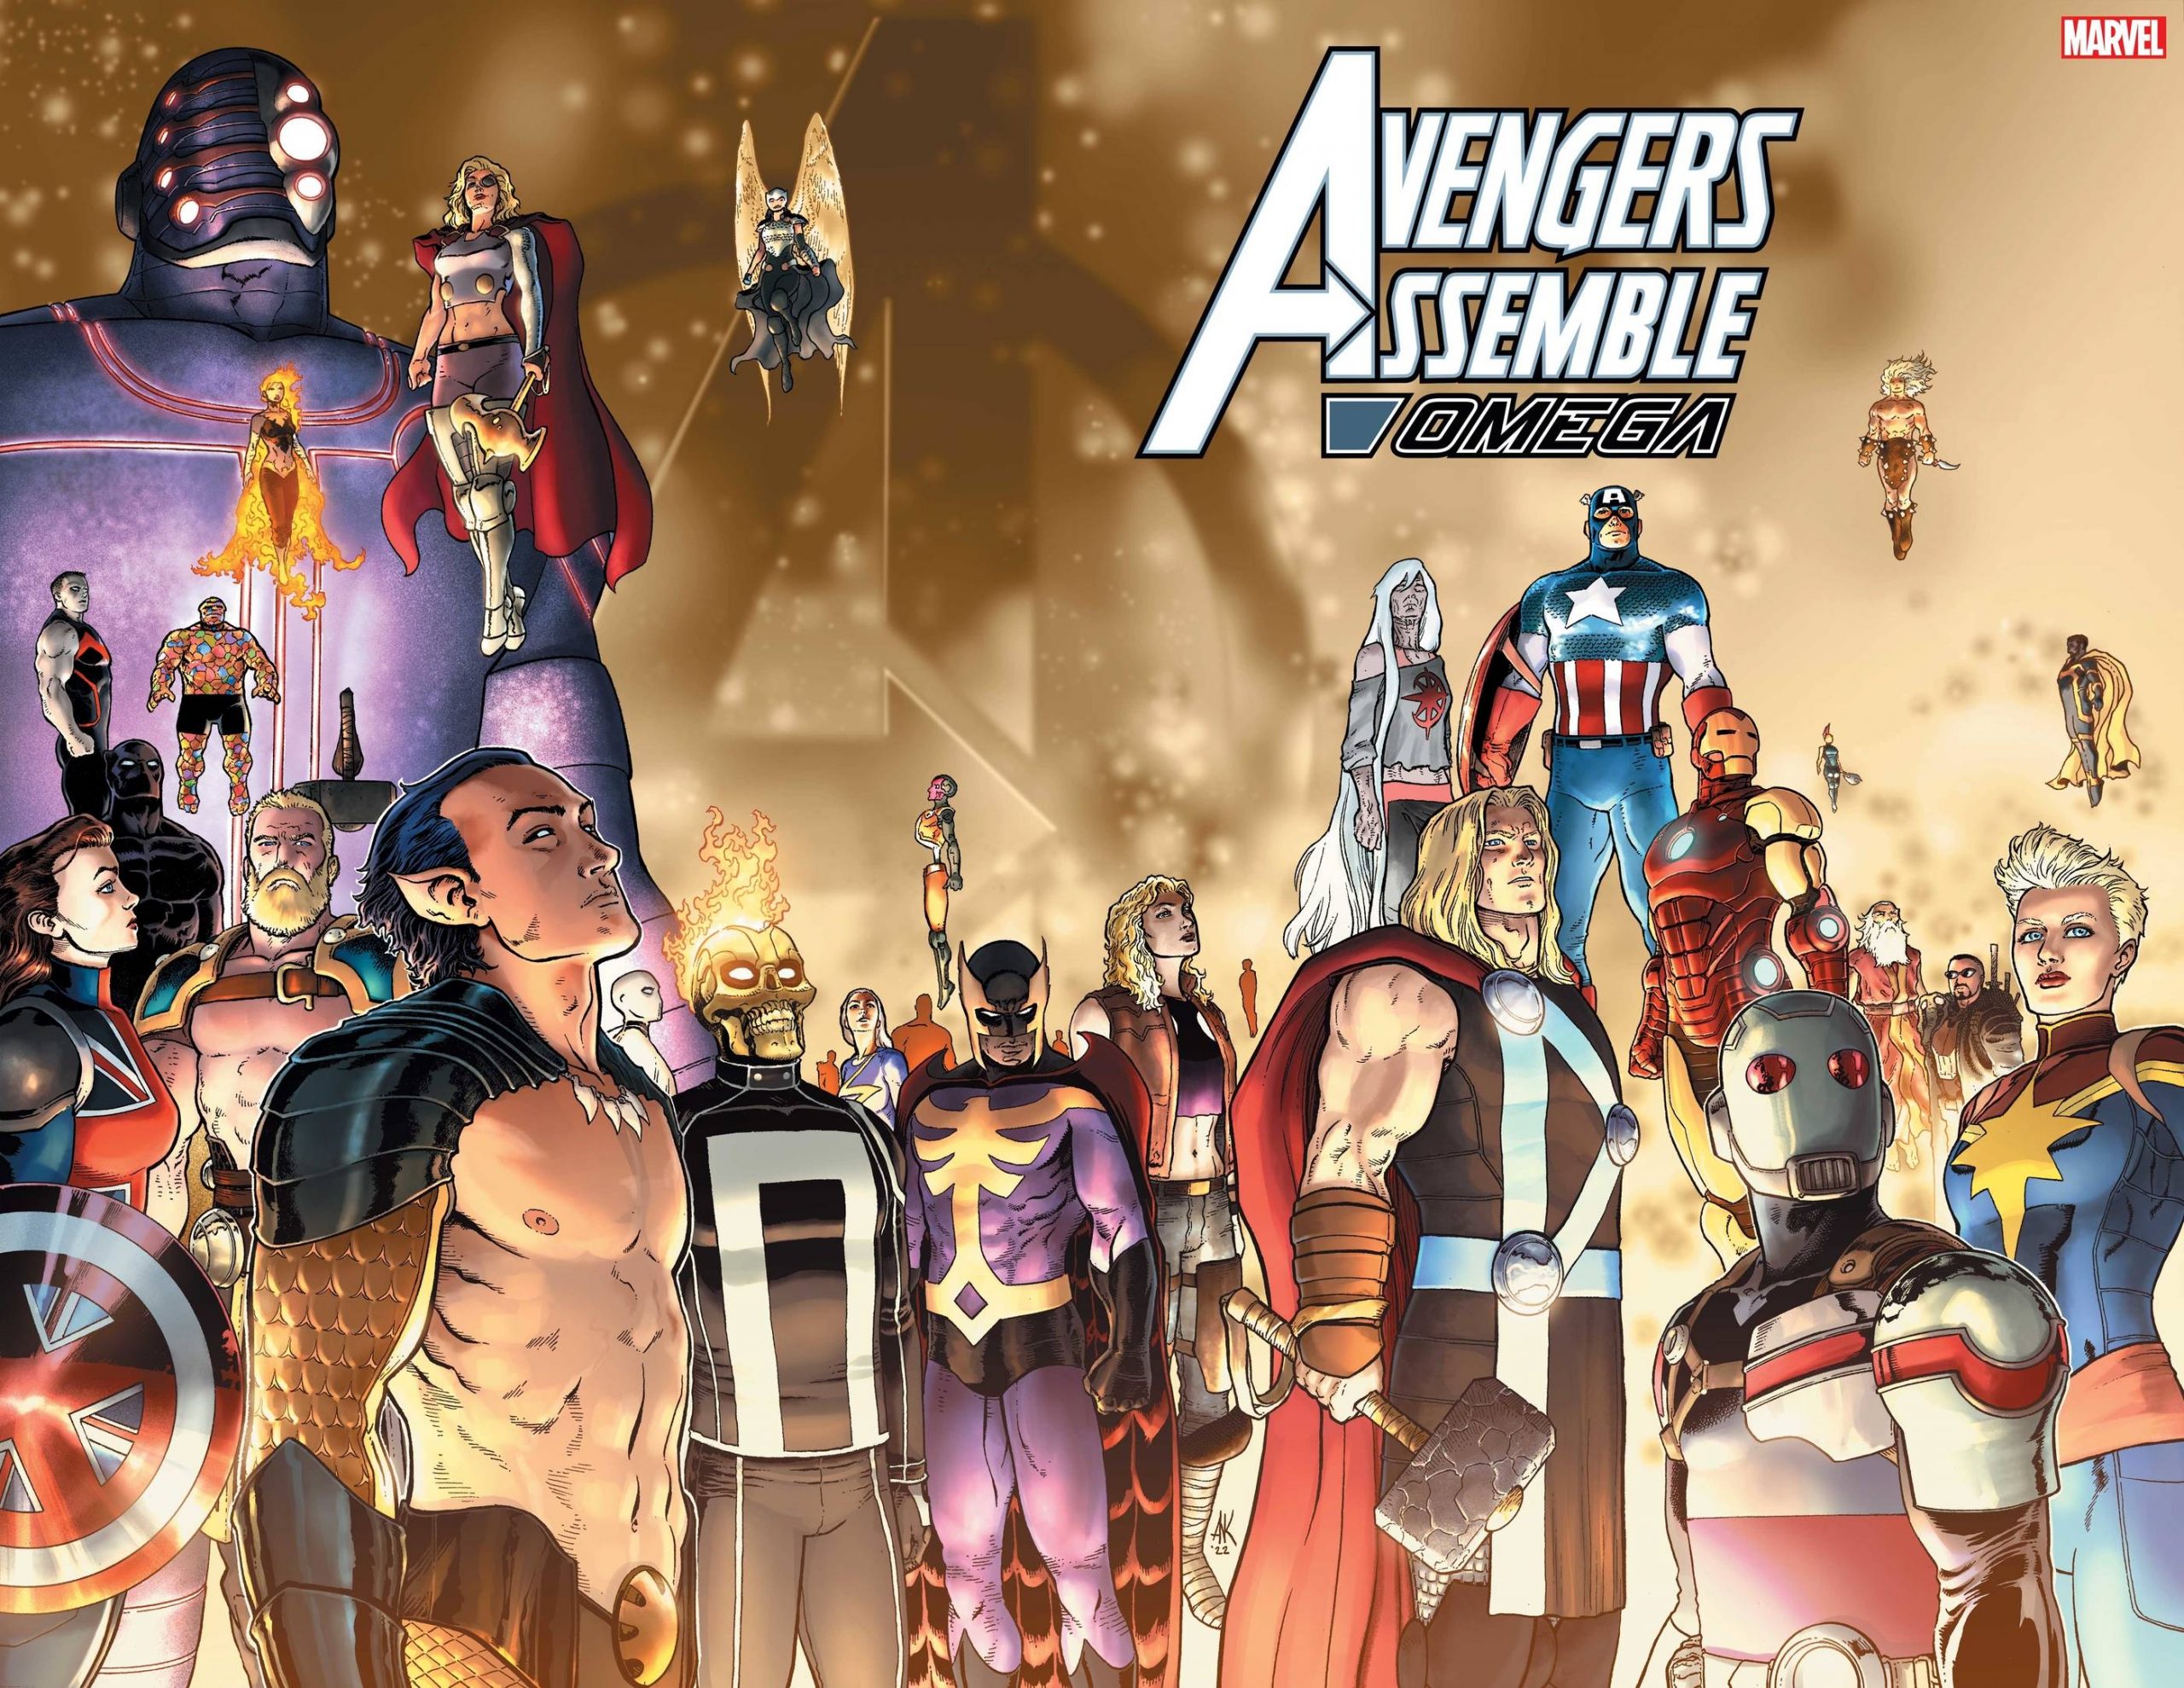 'Avengers Assemble: Omega' #1 features multiple ends and new beginnings